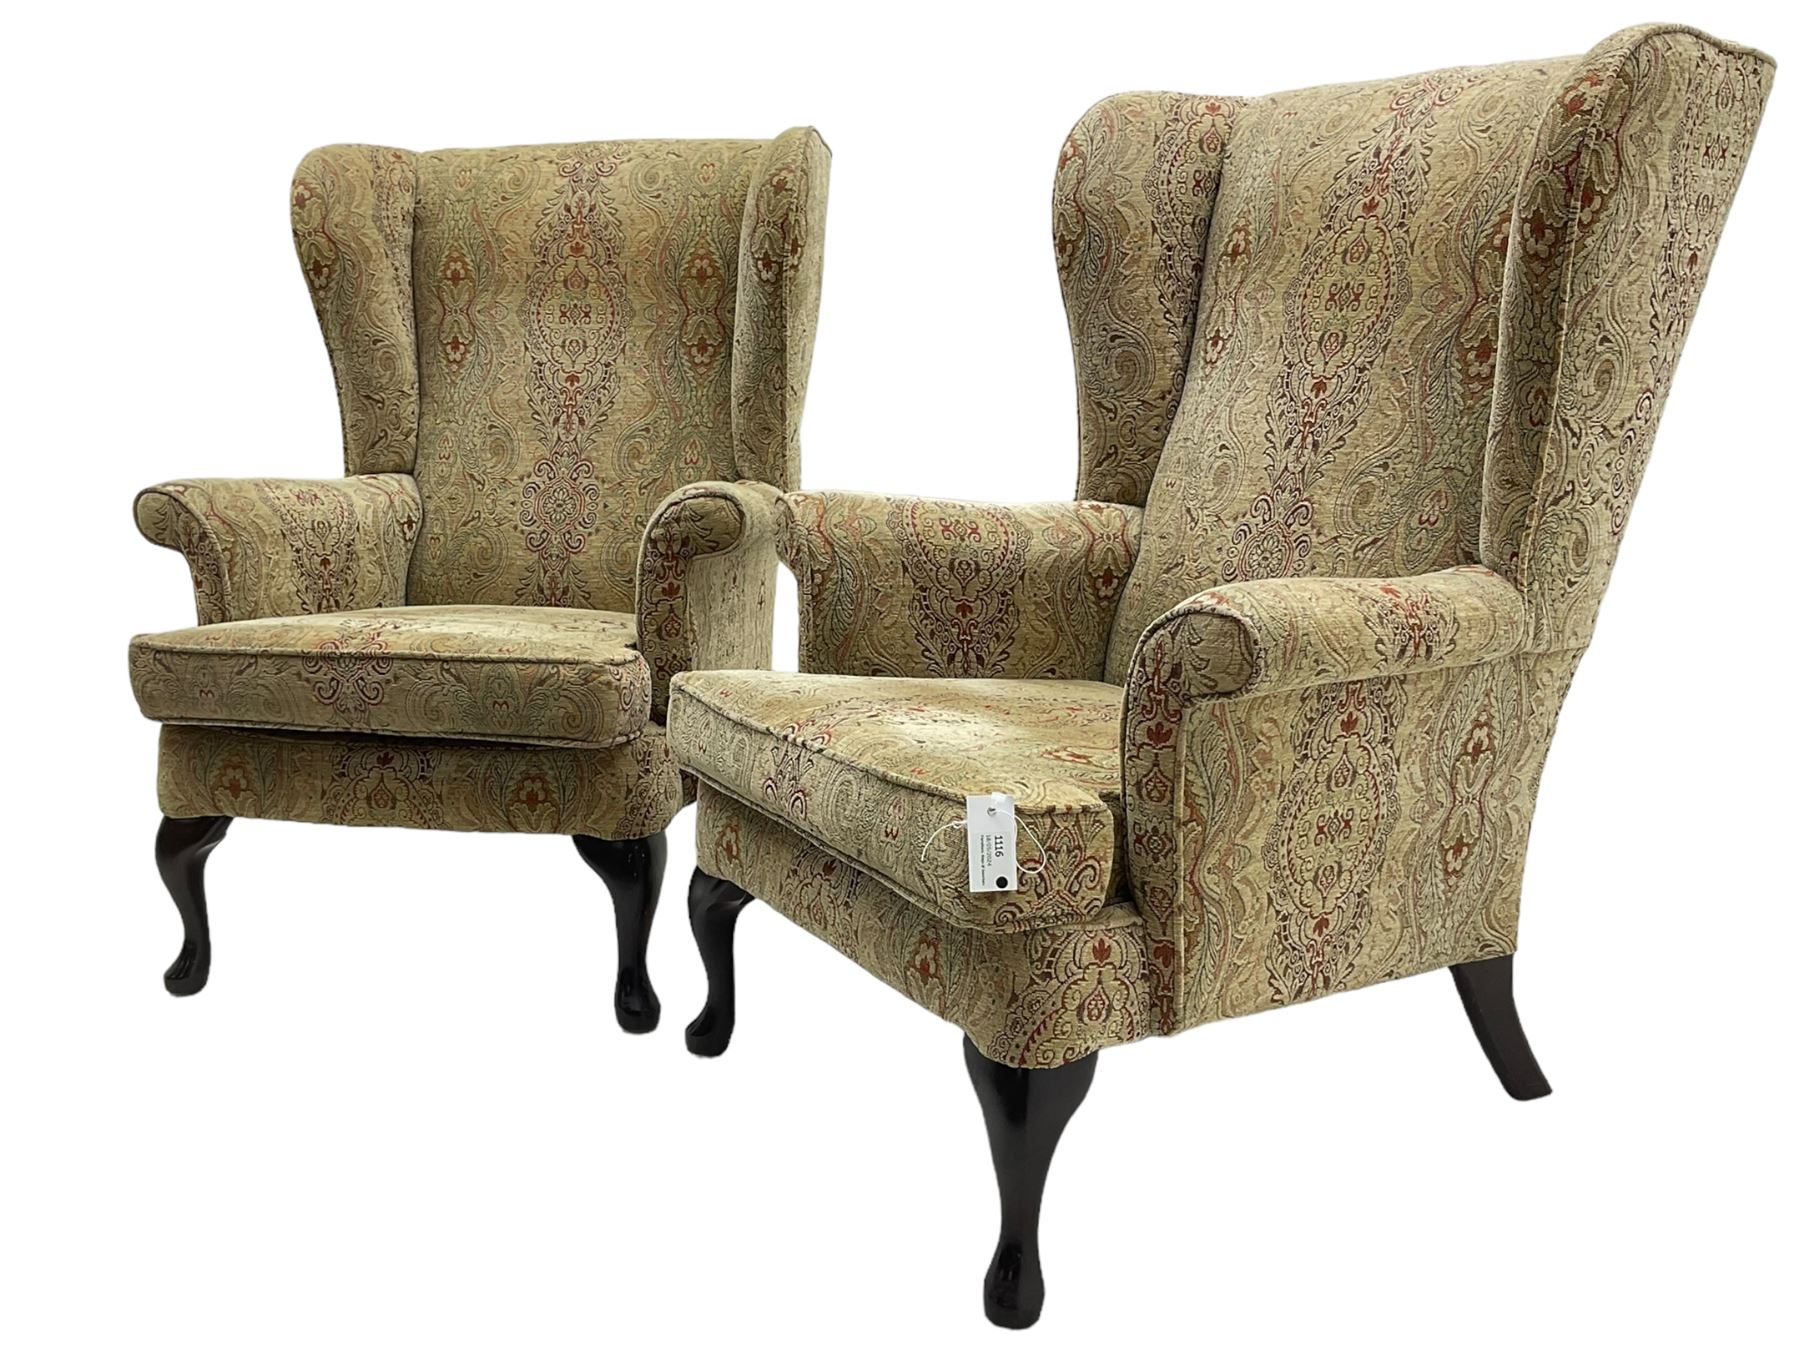 Parker Knoll - 'Burghley' pair of wingback armchairs - Image 3 of 5